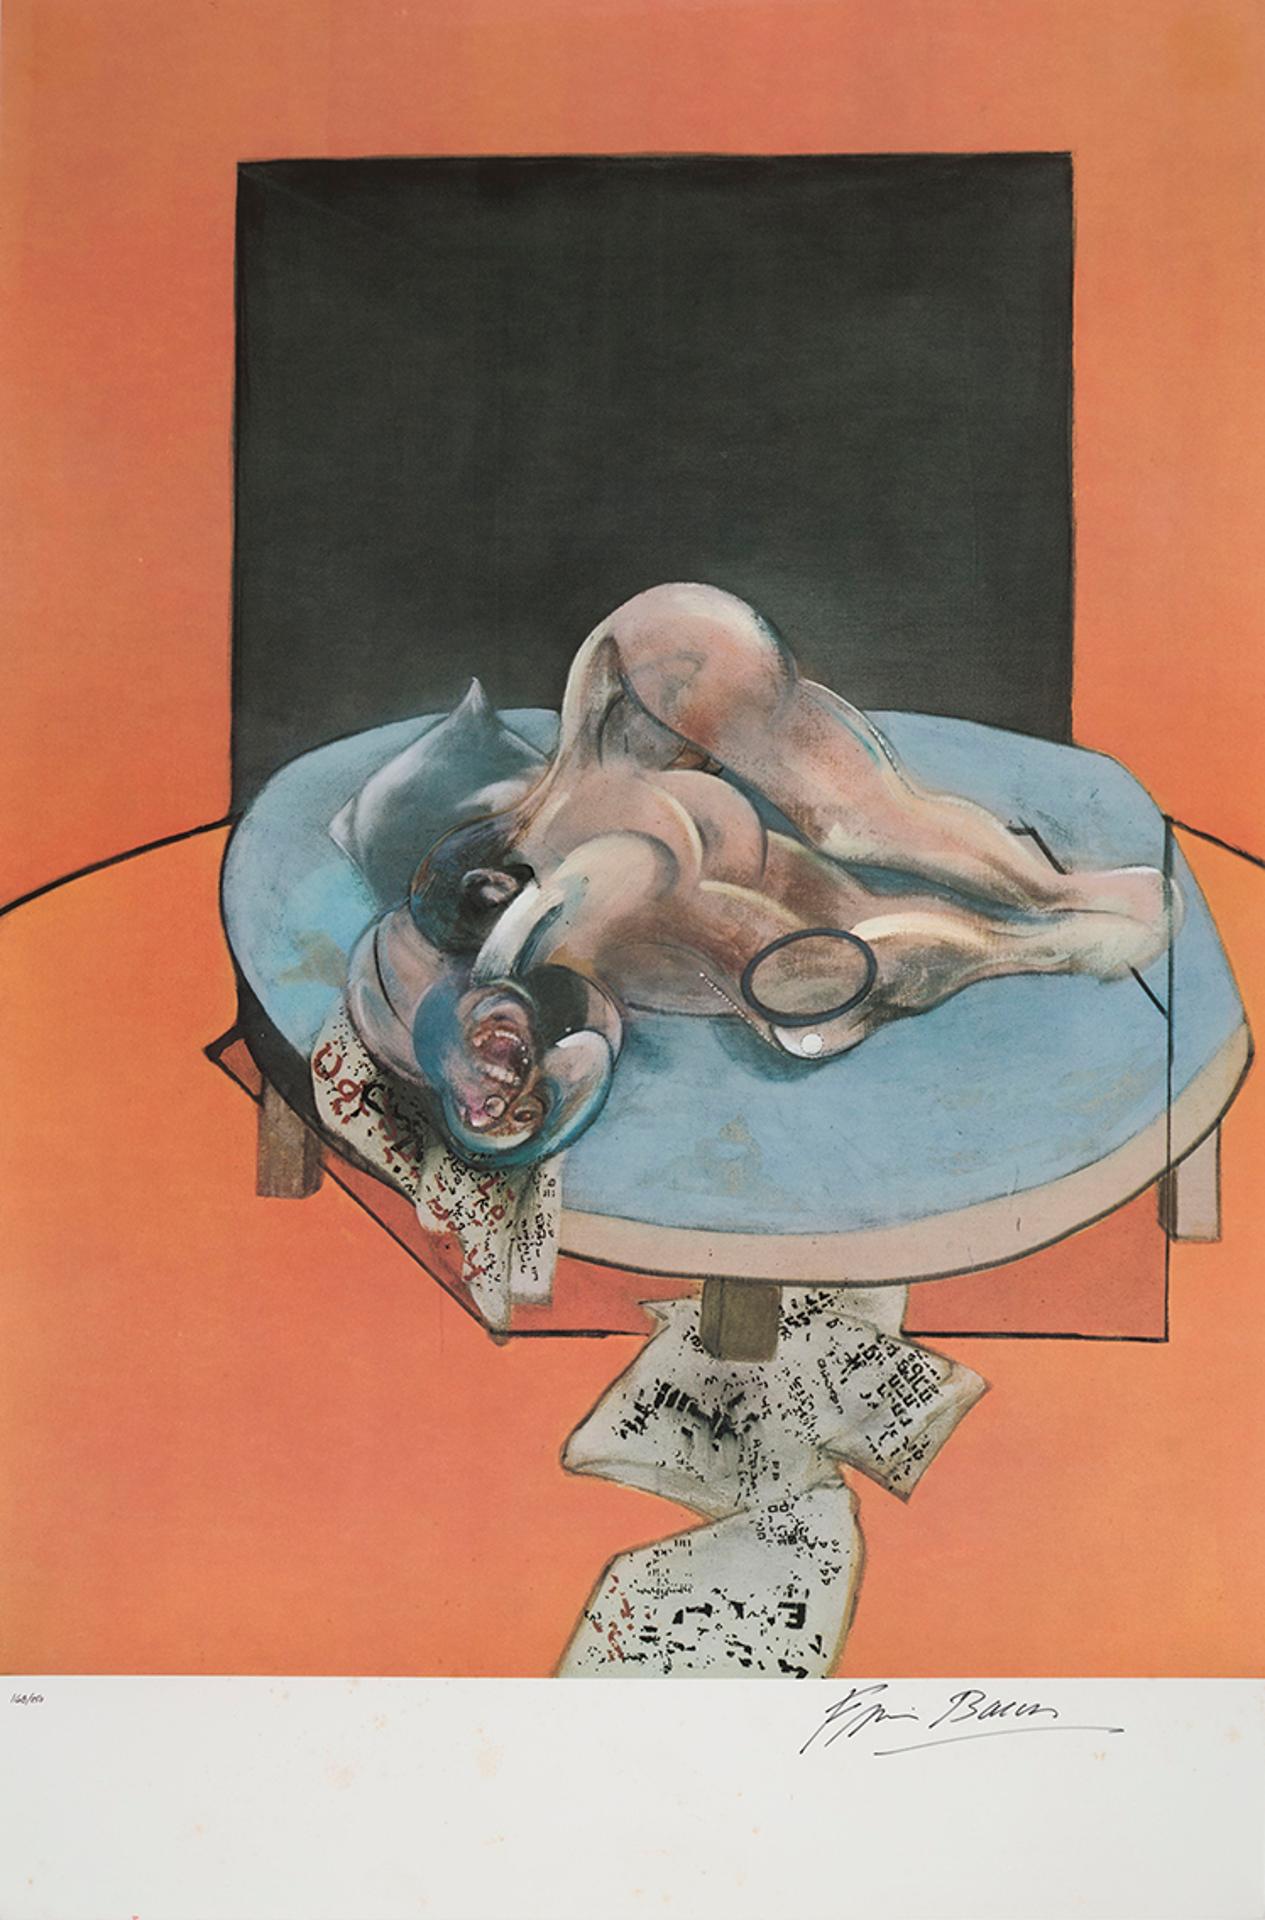 Francis Bacon (1909-1992) - Studies of the Human Body